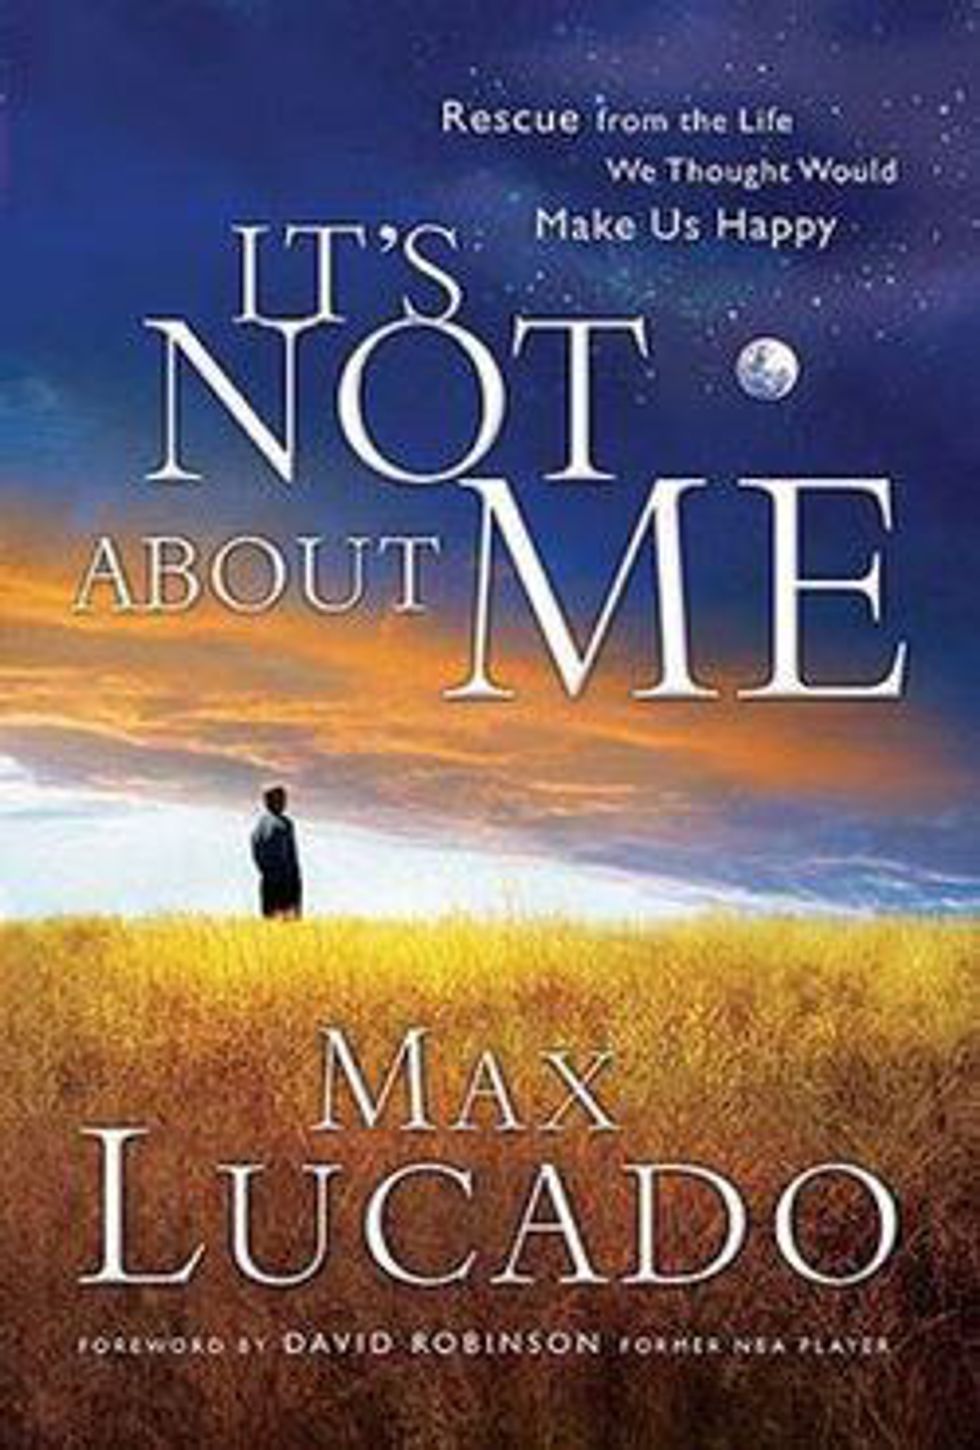 It's Not About Me by Max Lucado